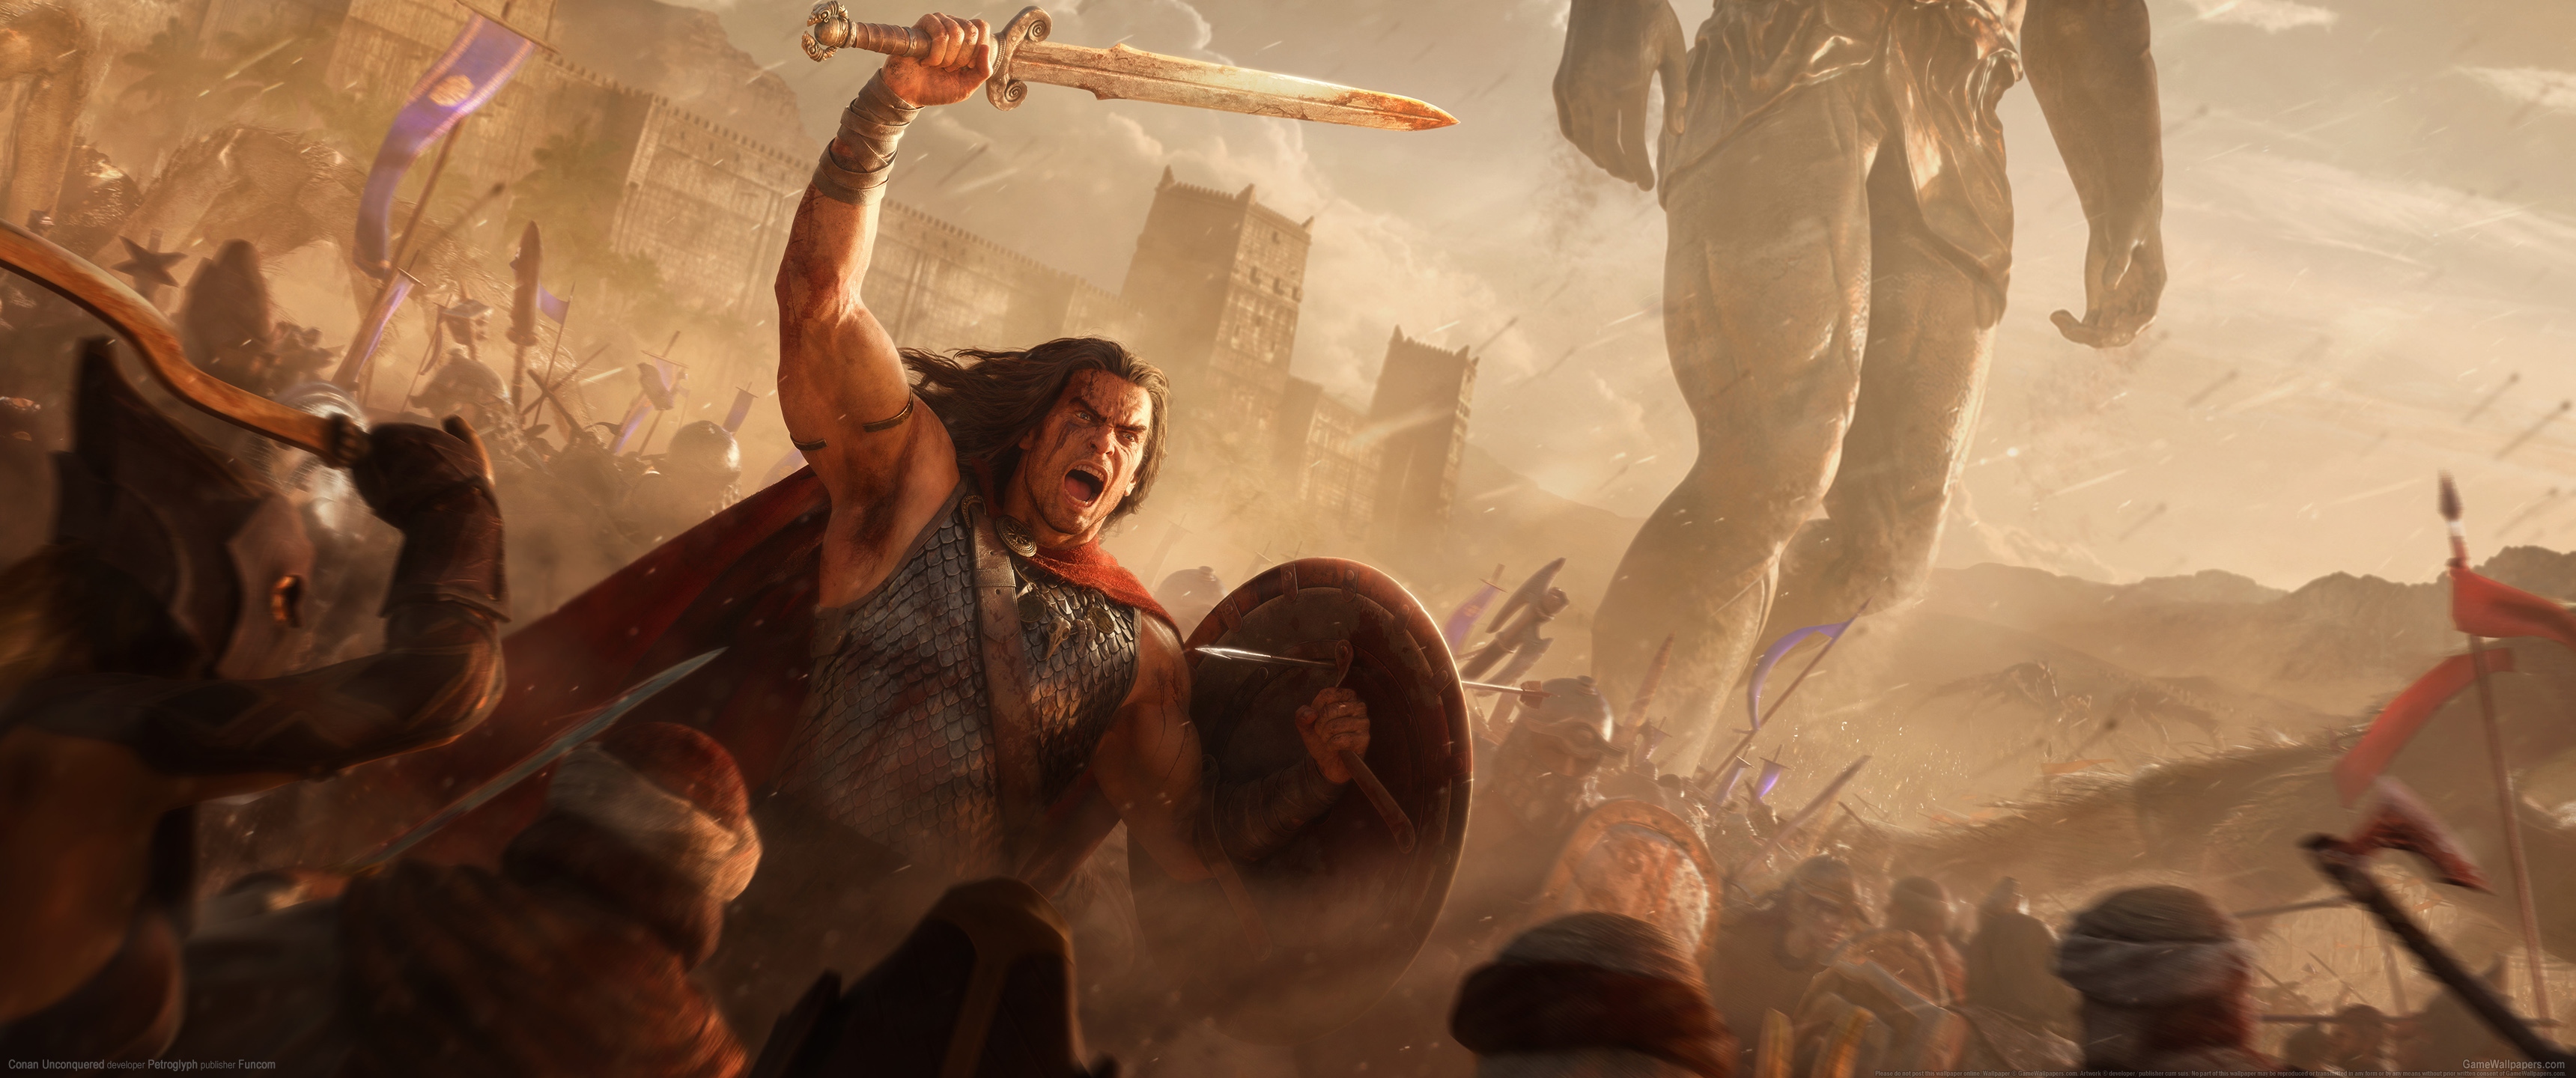 Conan Unconquered 3440x1440 wallpaper or background 01